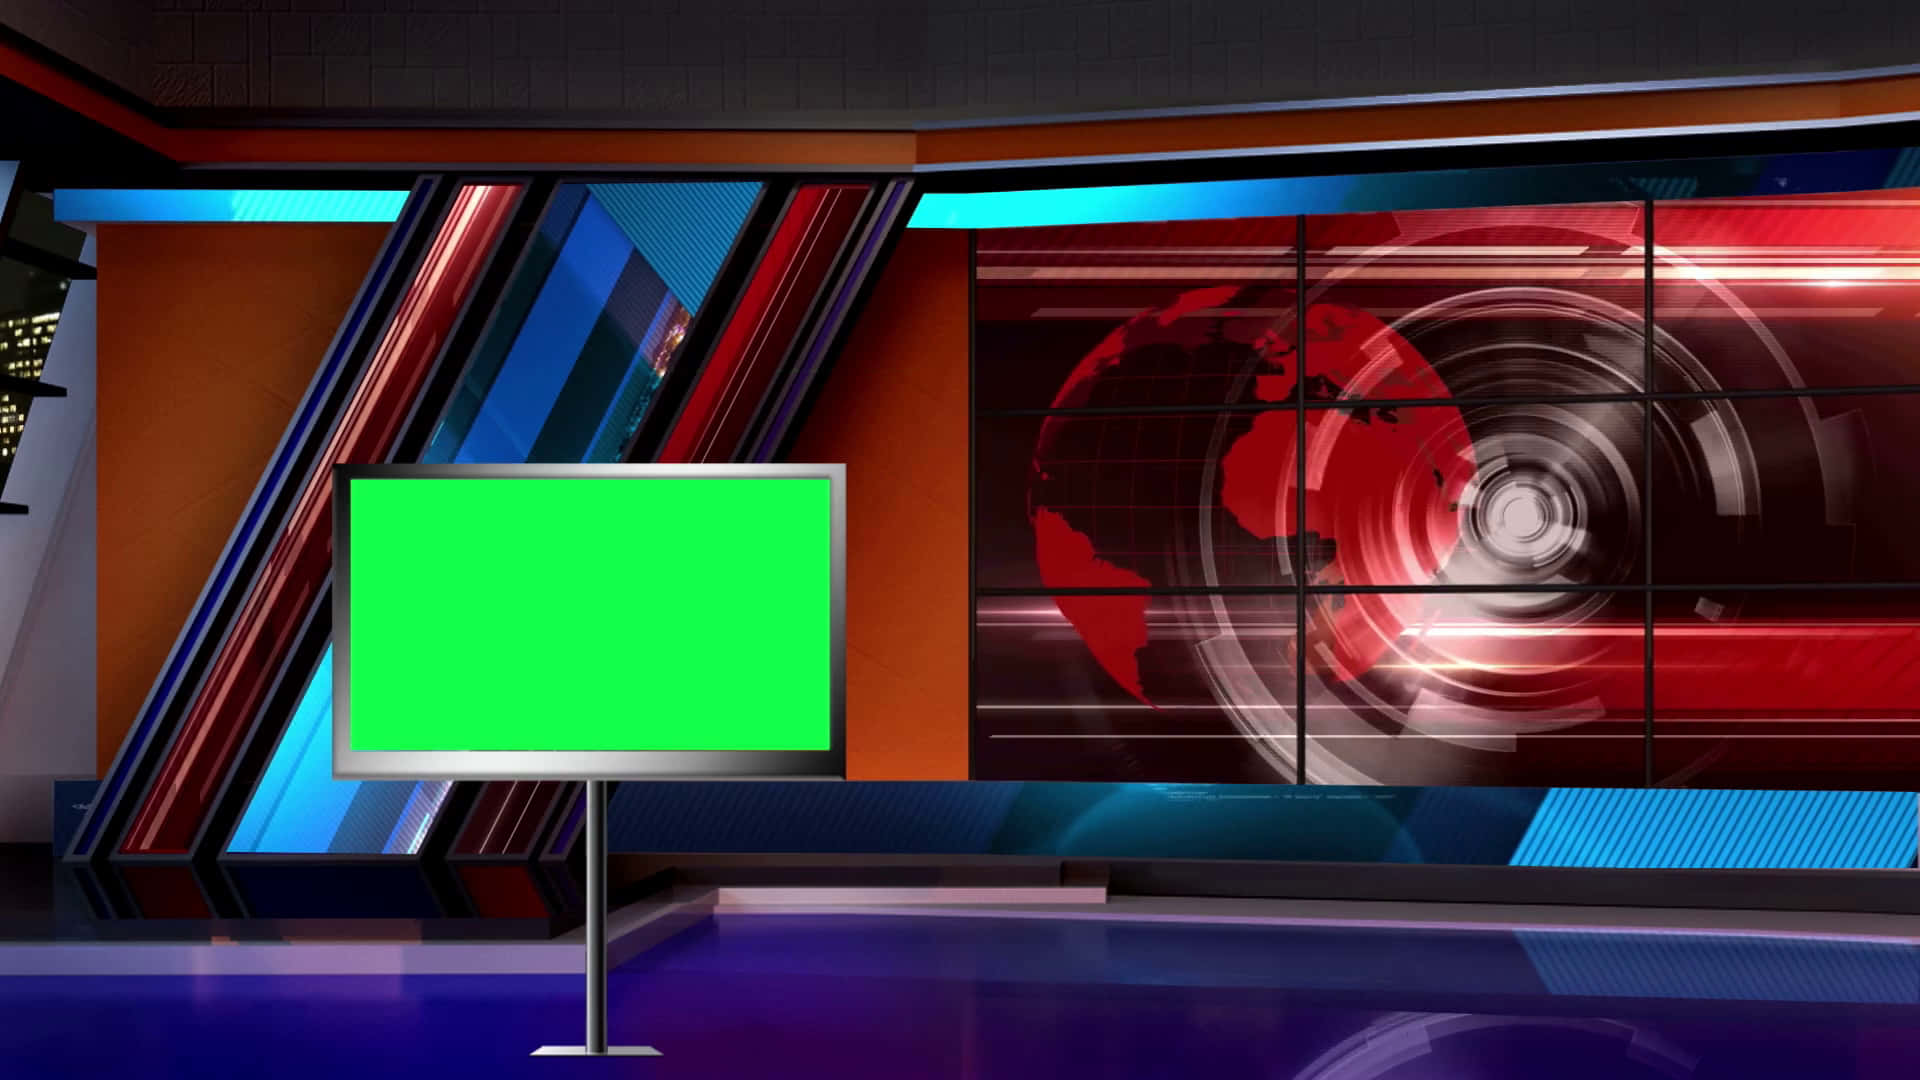 Download Get Ready for the Latest News with a Professional News Studio Set  up 